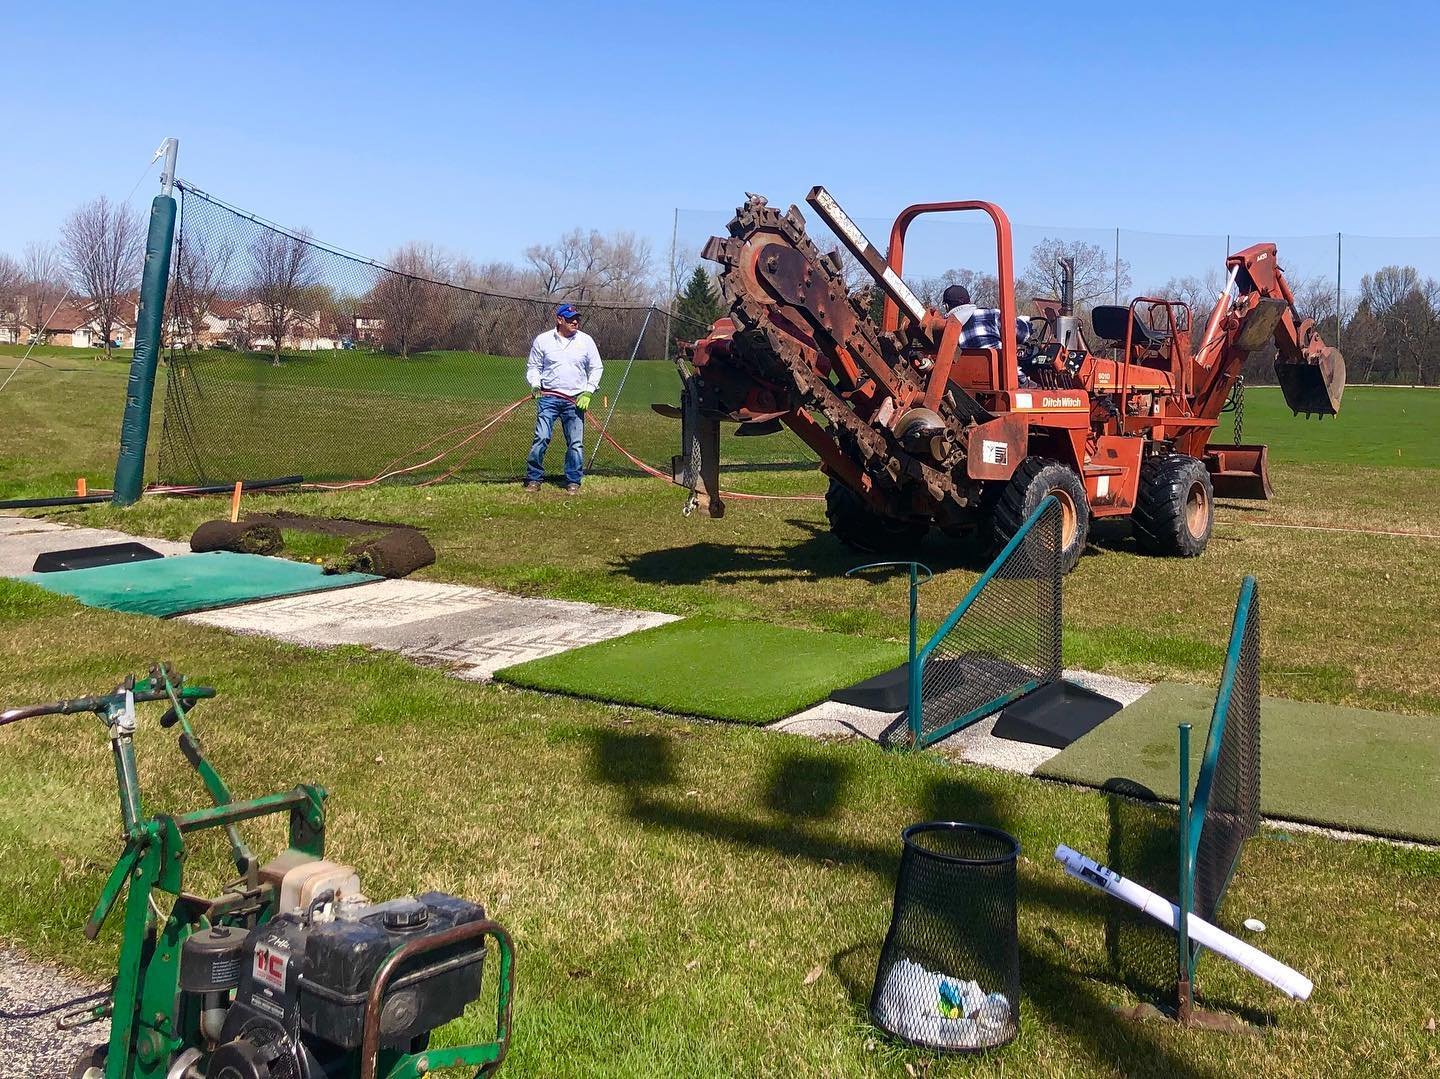 Recently, Halloran &amp; Yauch teamed up with @addisonparkdist to install a new system for their 9-hole golf course and driving range. Considering &ldquo;Links &amp; Tees Golf Facility&rdquo; was built in 1958 and is still operating 65 years later, i